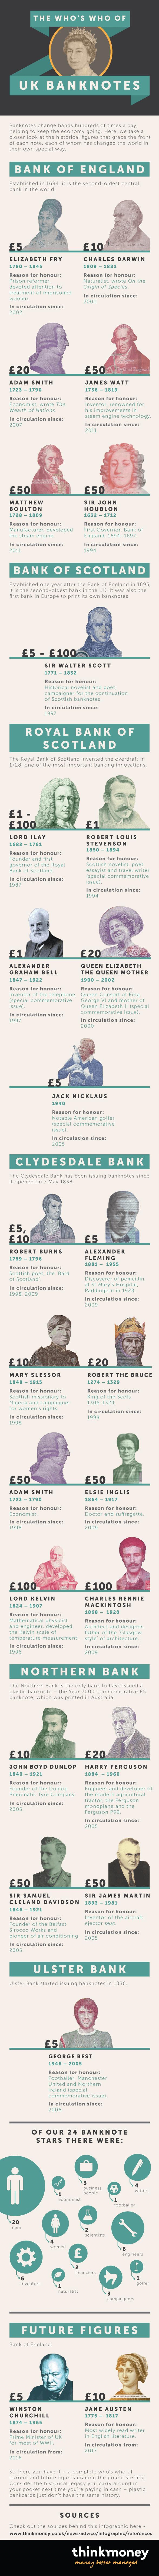 the-whos-who-of-uk-banknotes-branded